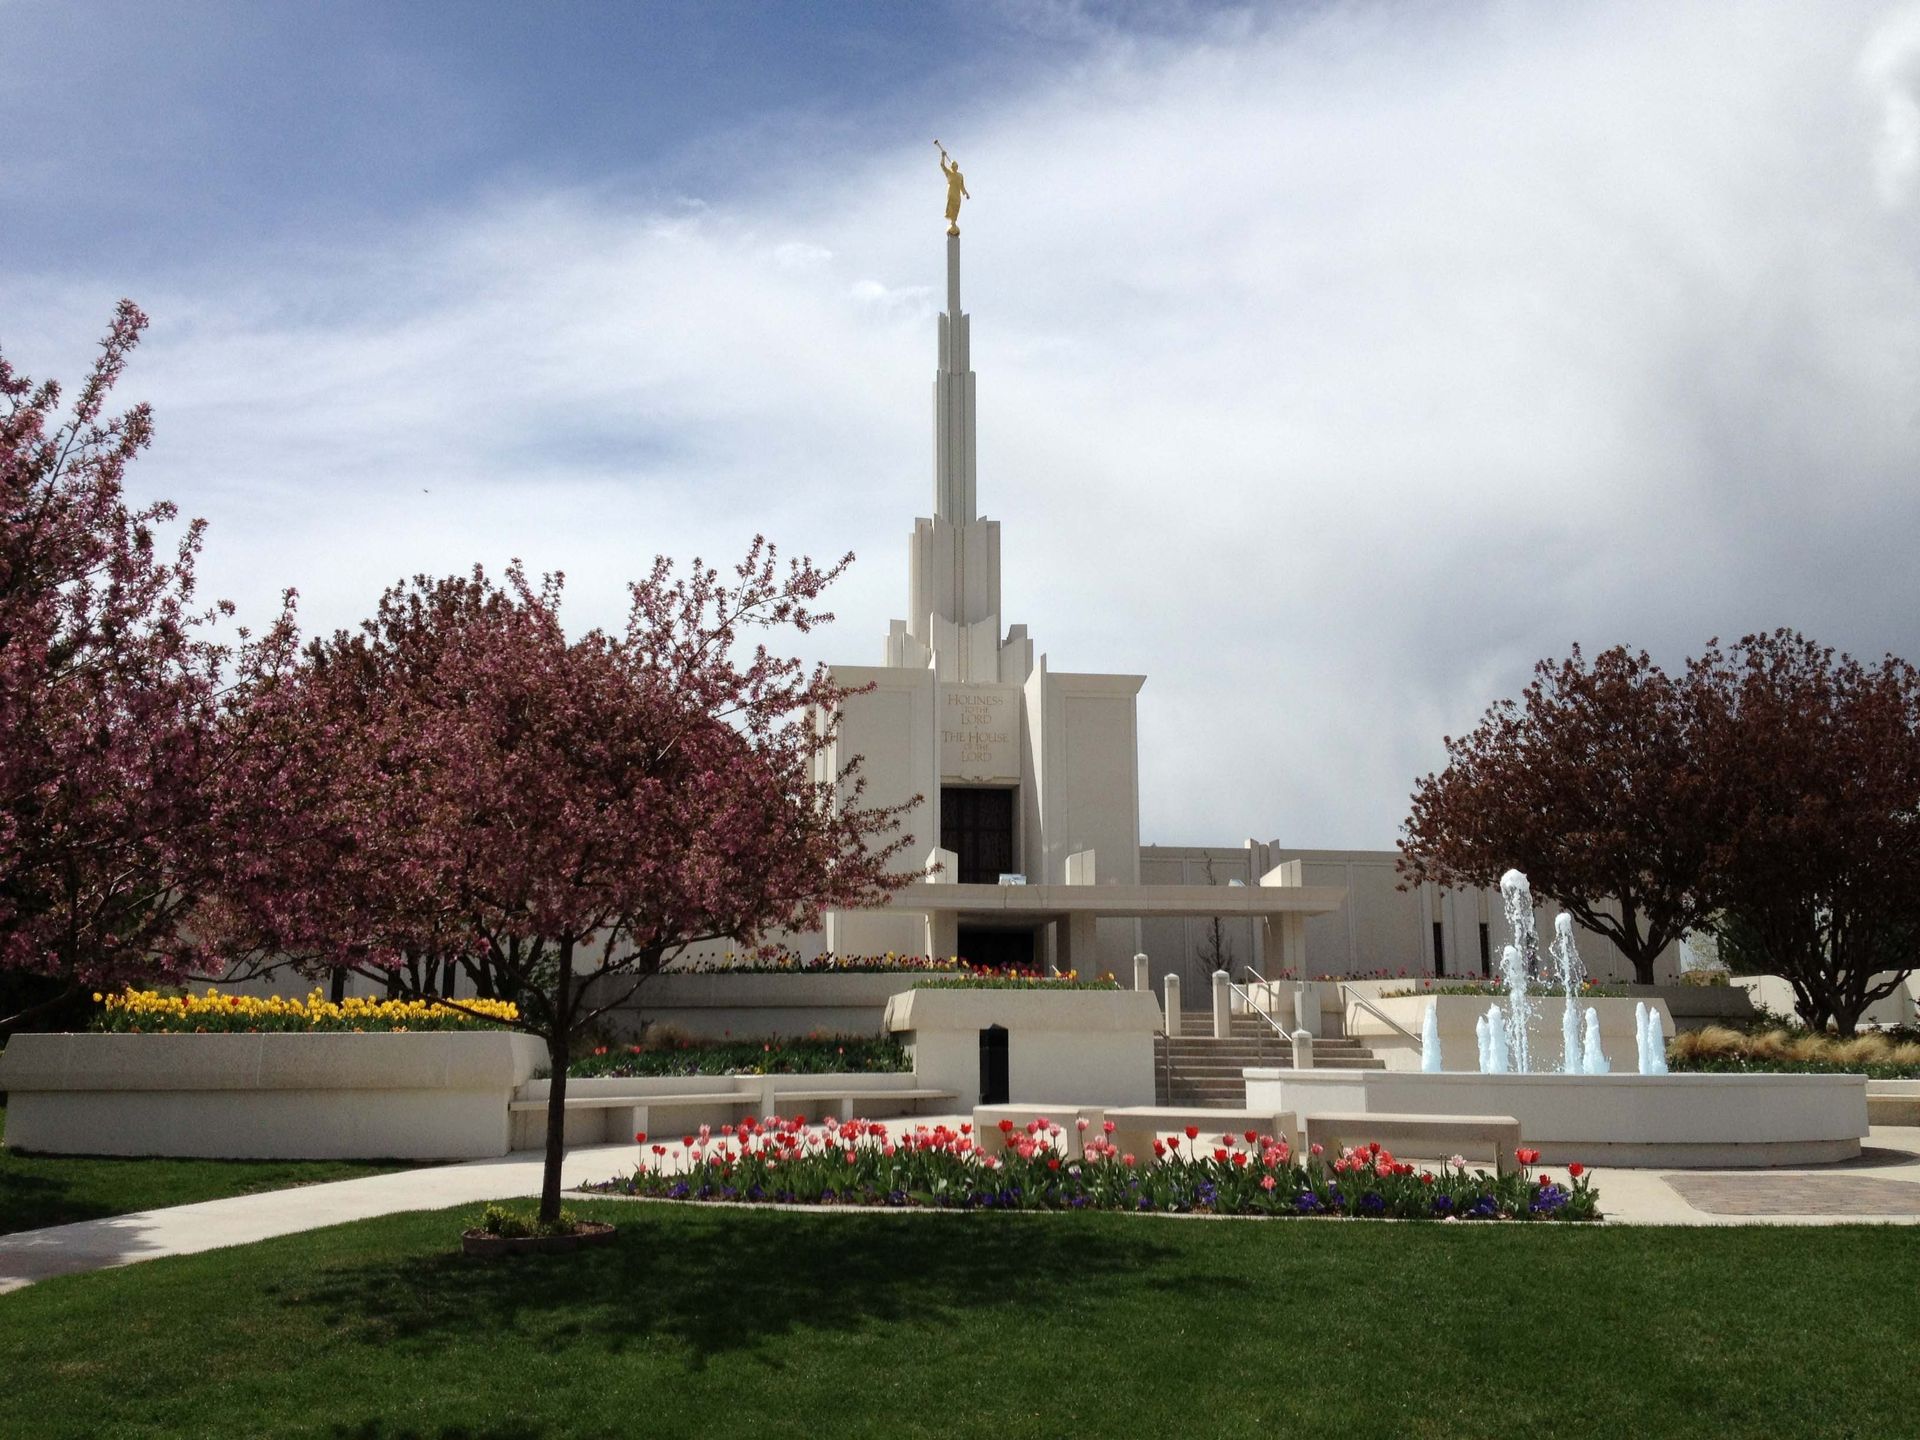 An exterior view of the Denver Colorado Temple and grounds.